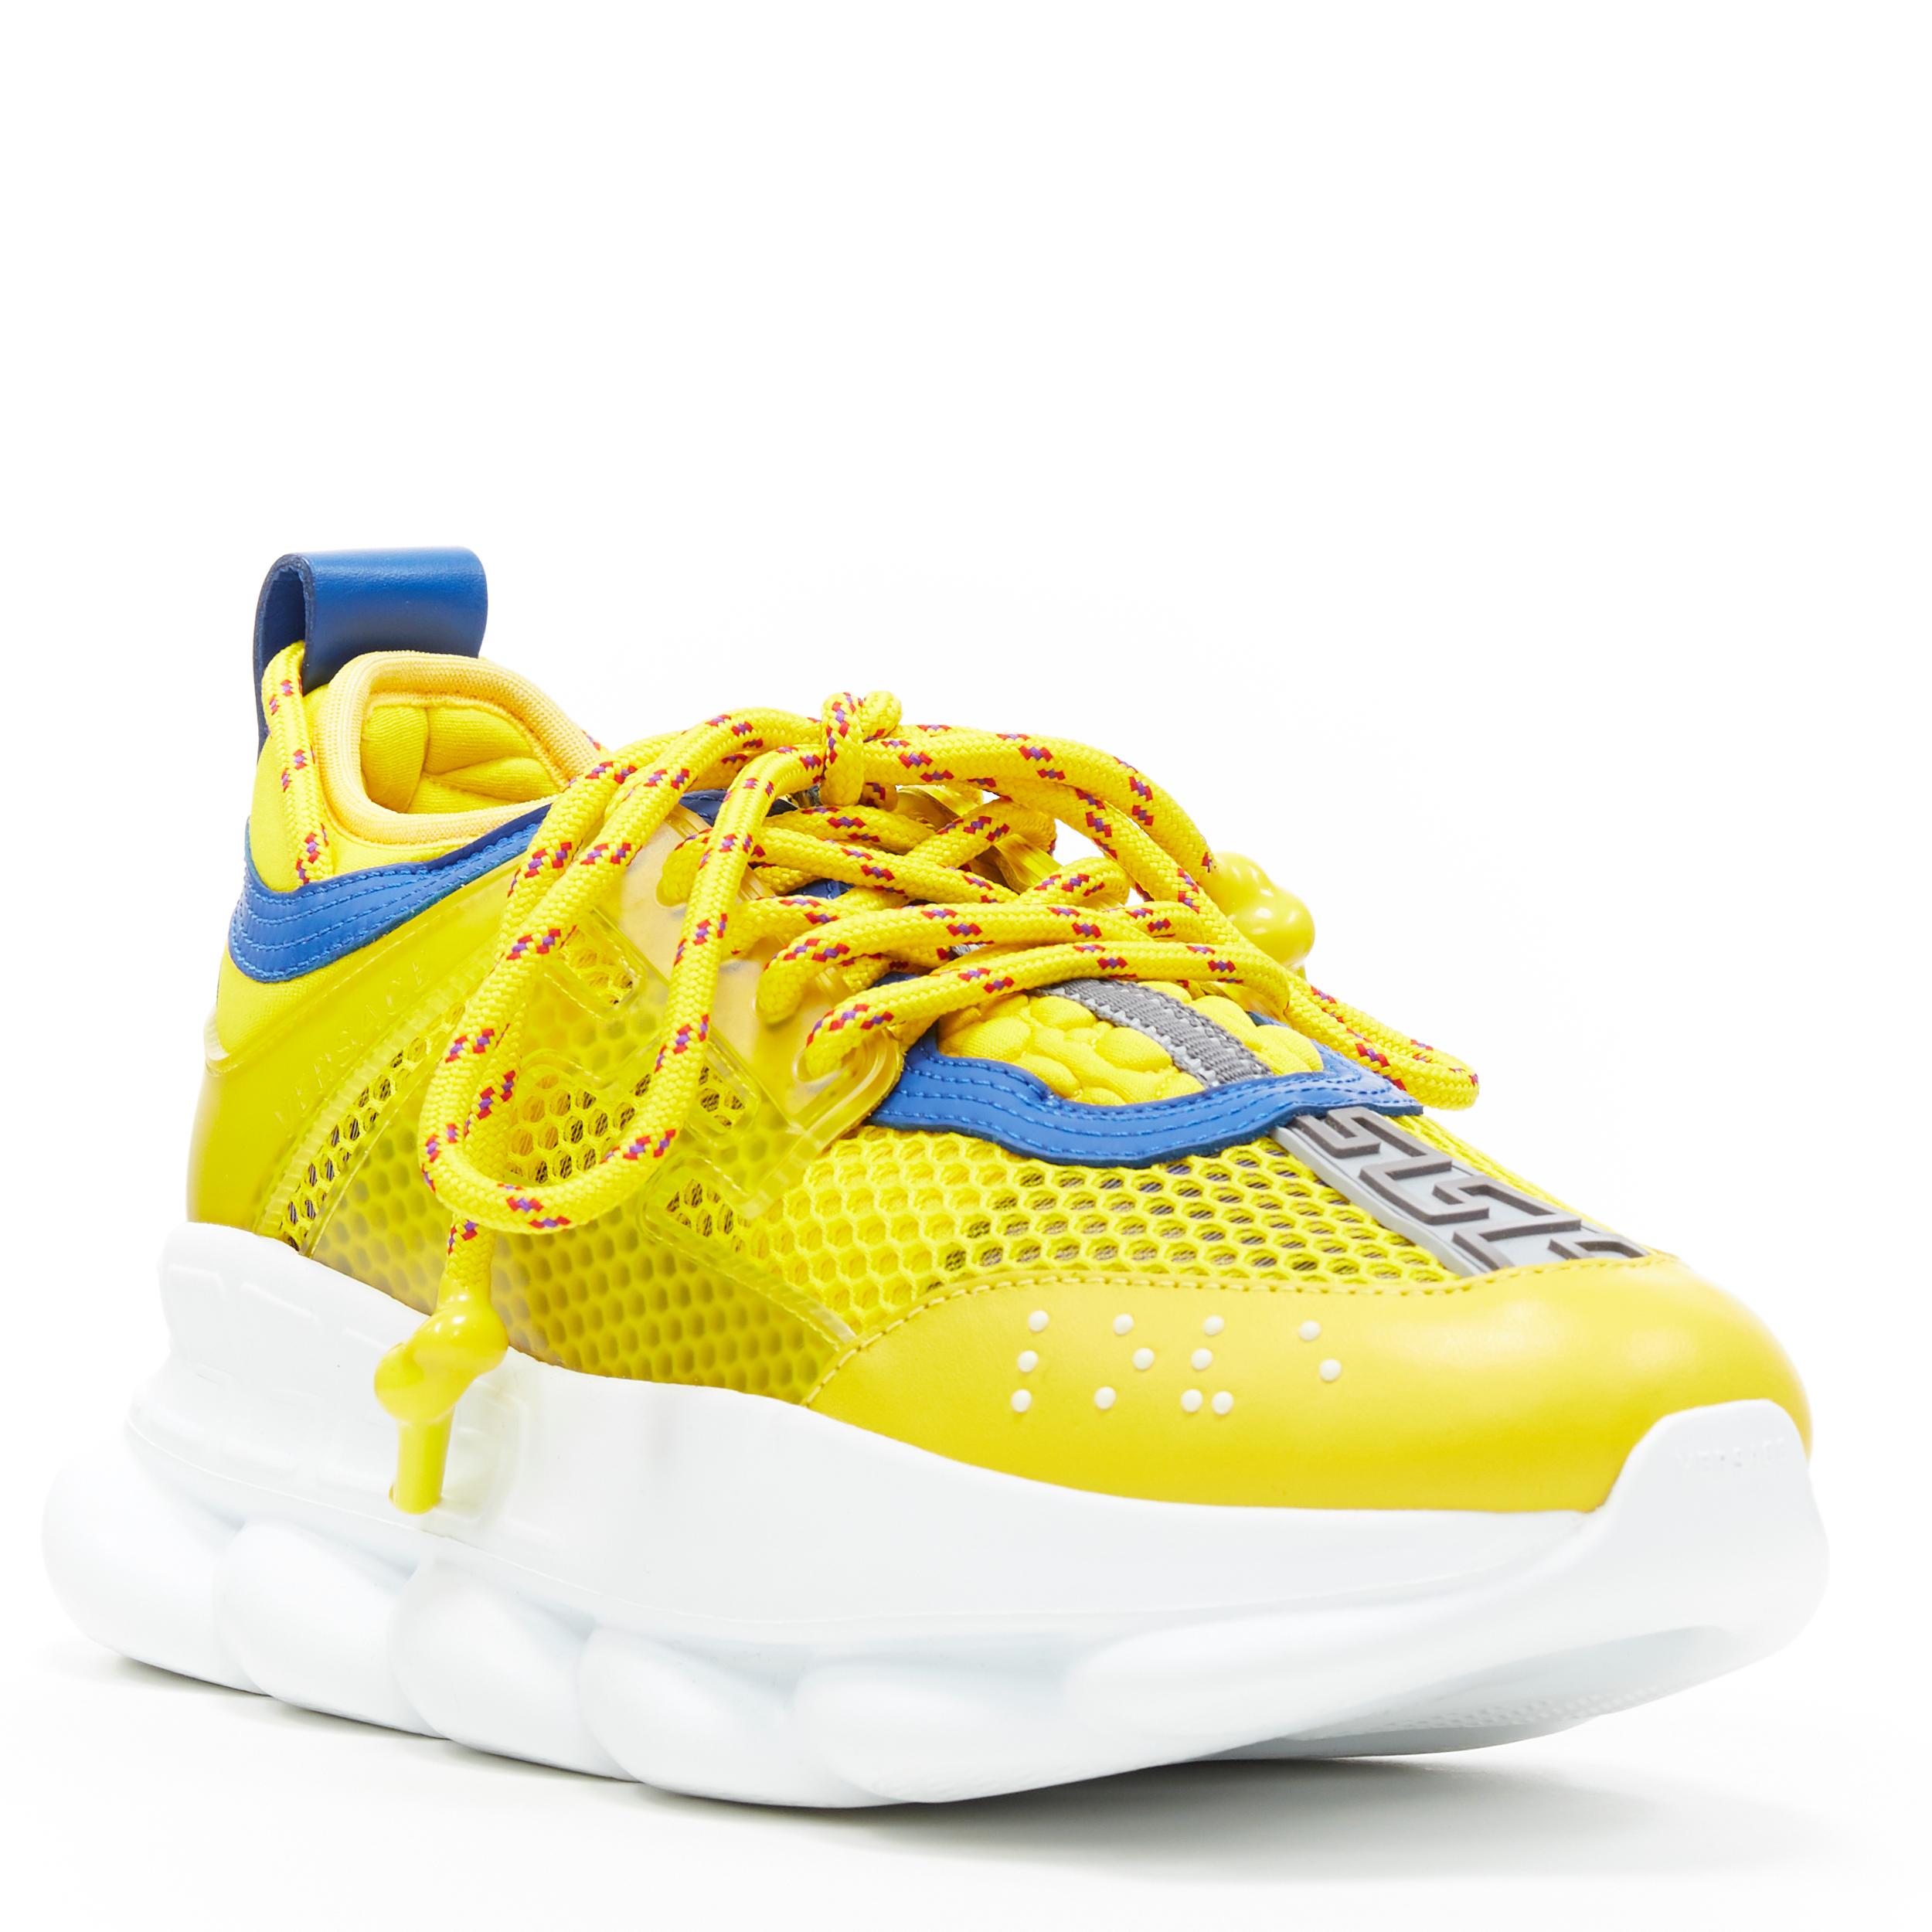 new VERSACE Runway Chain Reaction yellow mesh blue chunky dad sneaker EU38
Brand: Versace
Designer: Donatella Versace
Collection: 2019
Model Name / Style: Chain Reaction
Material: Fabric
Color: Yellow
Pattern: Solid
Closure: Lace up
Extra Detail: